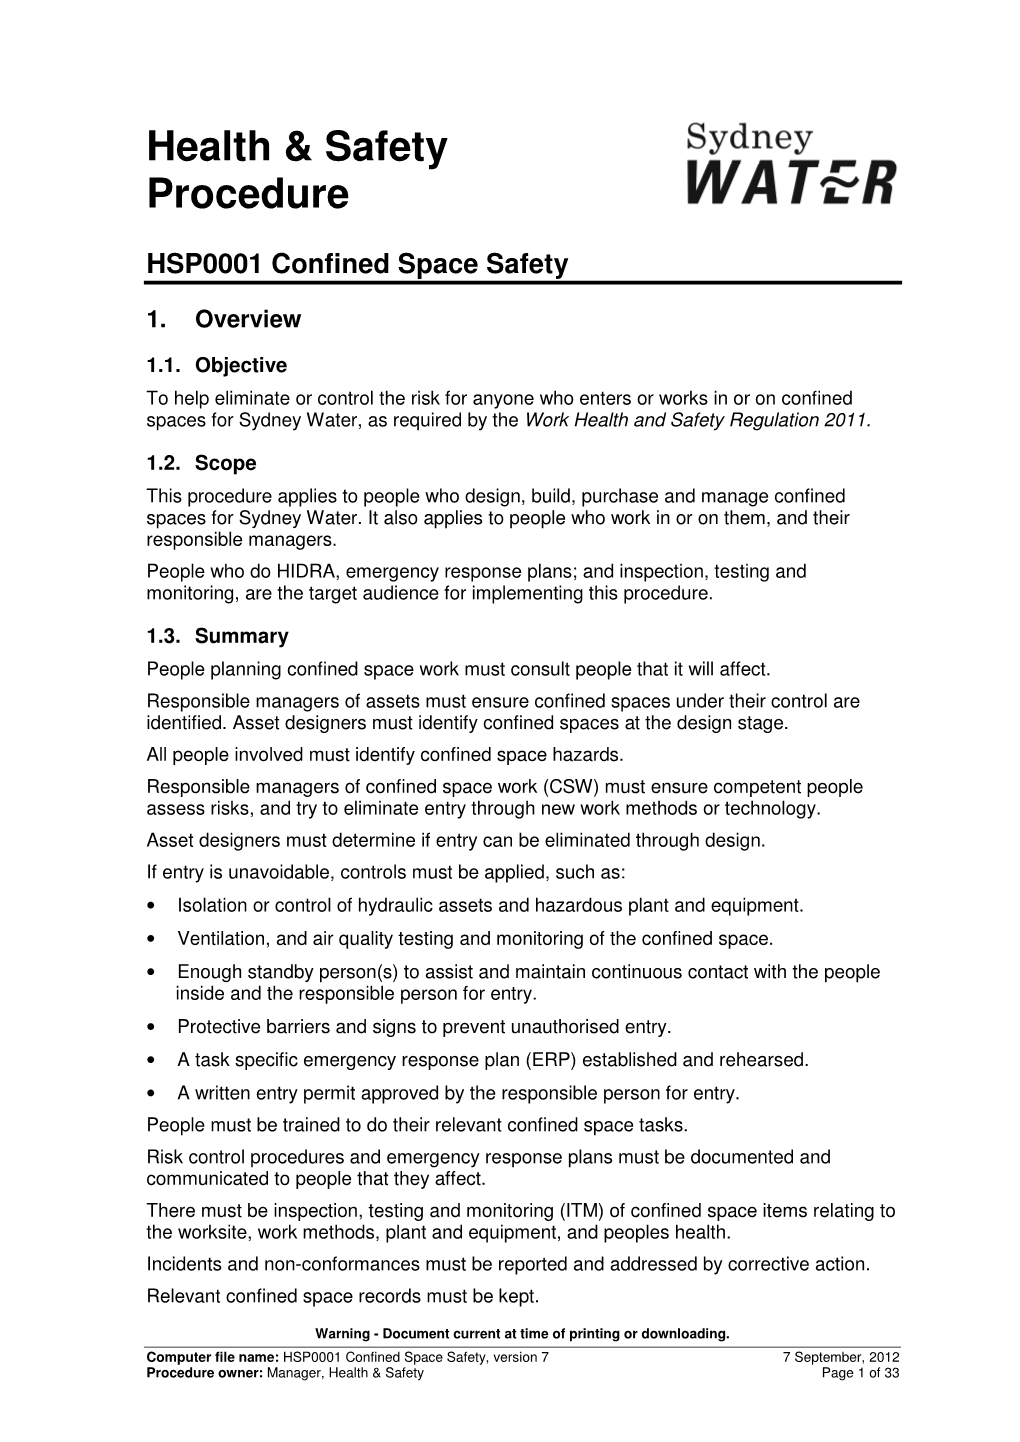 HSP0001 Confined Space Safety